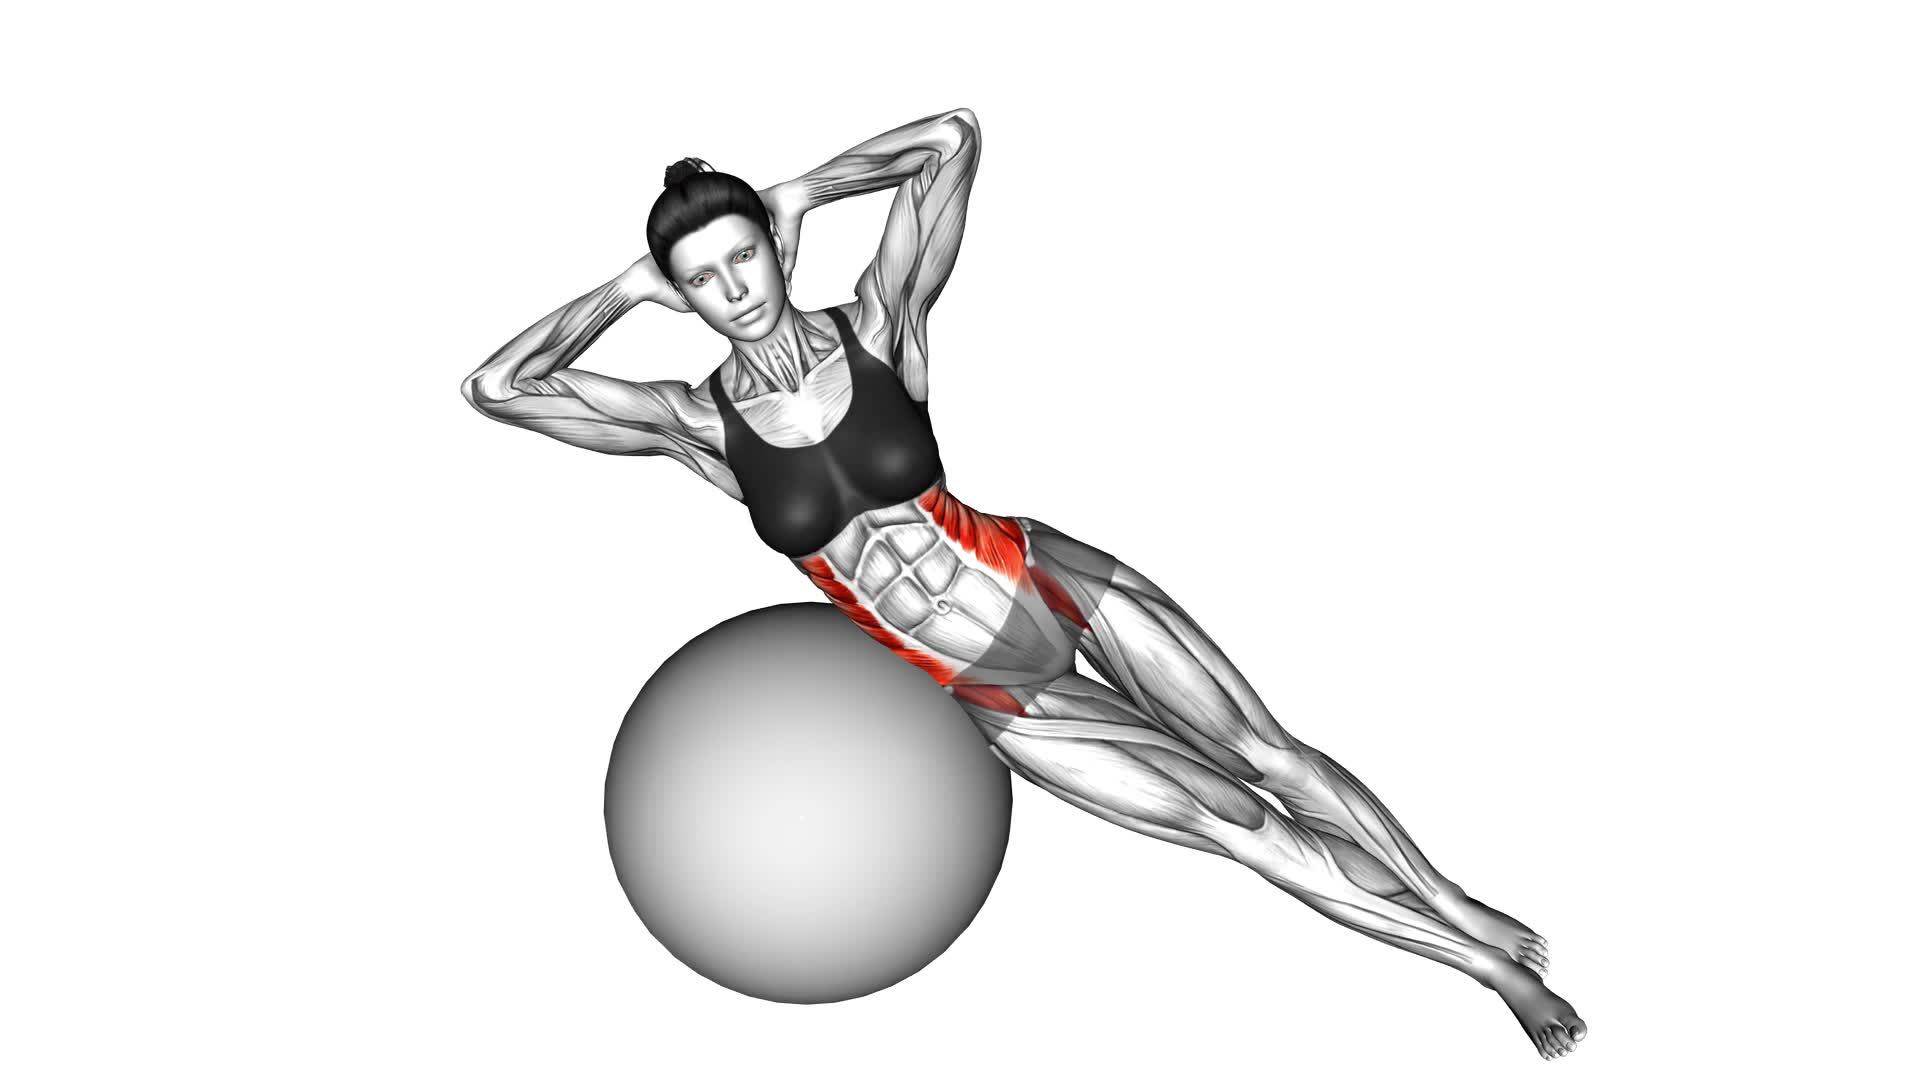 Side Bend (On Stability Ball) - Video Exercise Guide & Tips